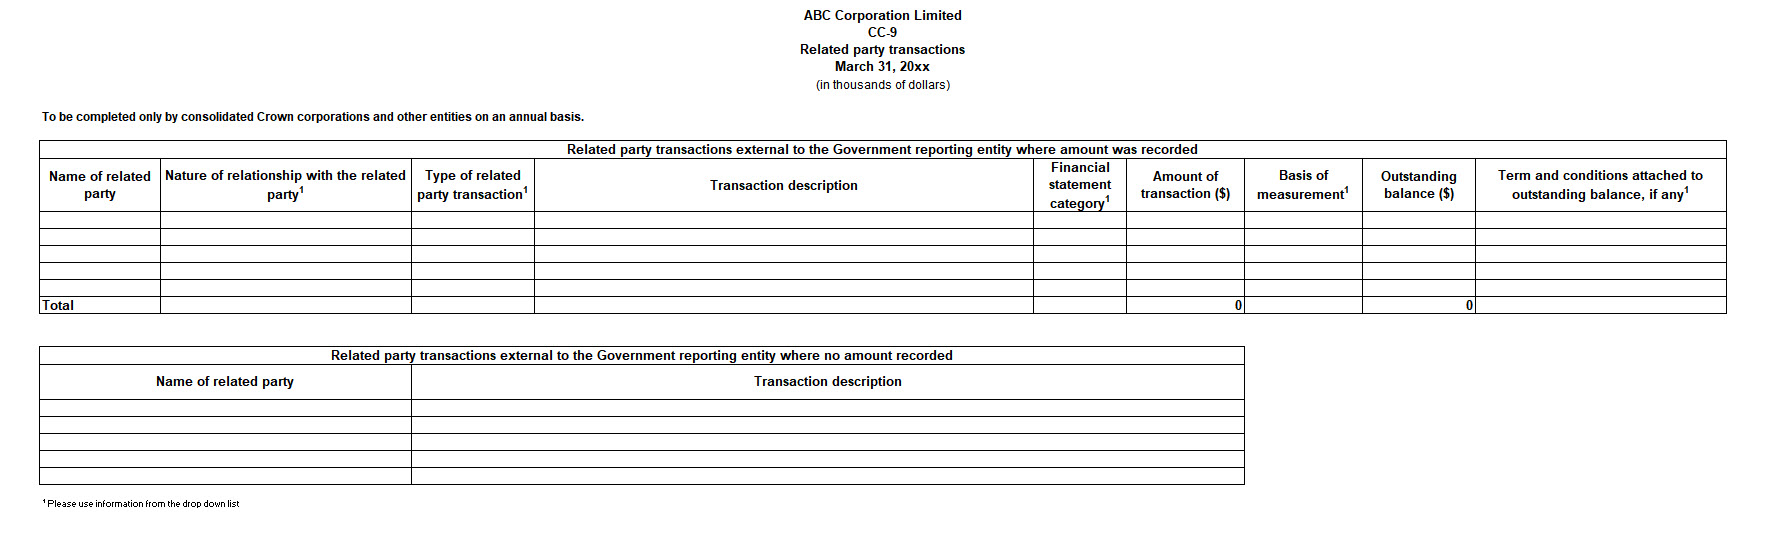 Screen capture of Form CC-9: Related party transactions - Text version below the image